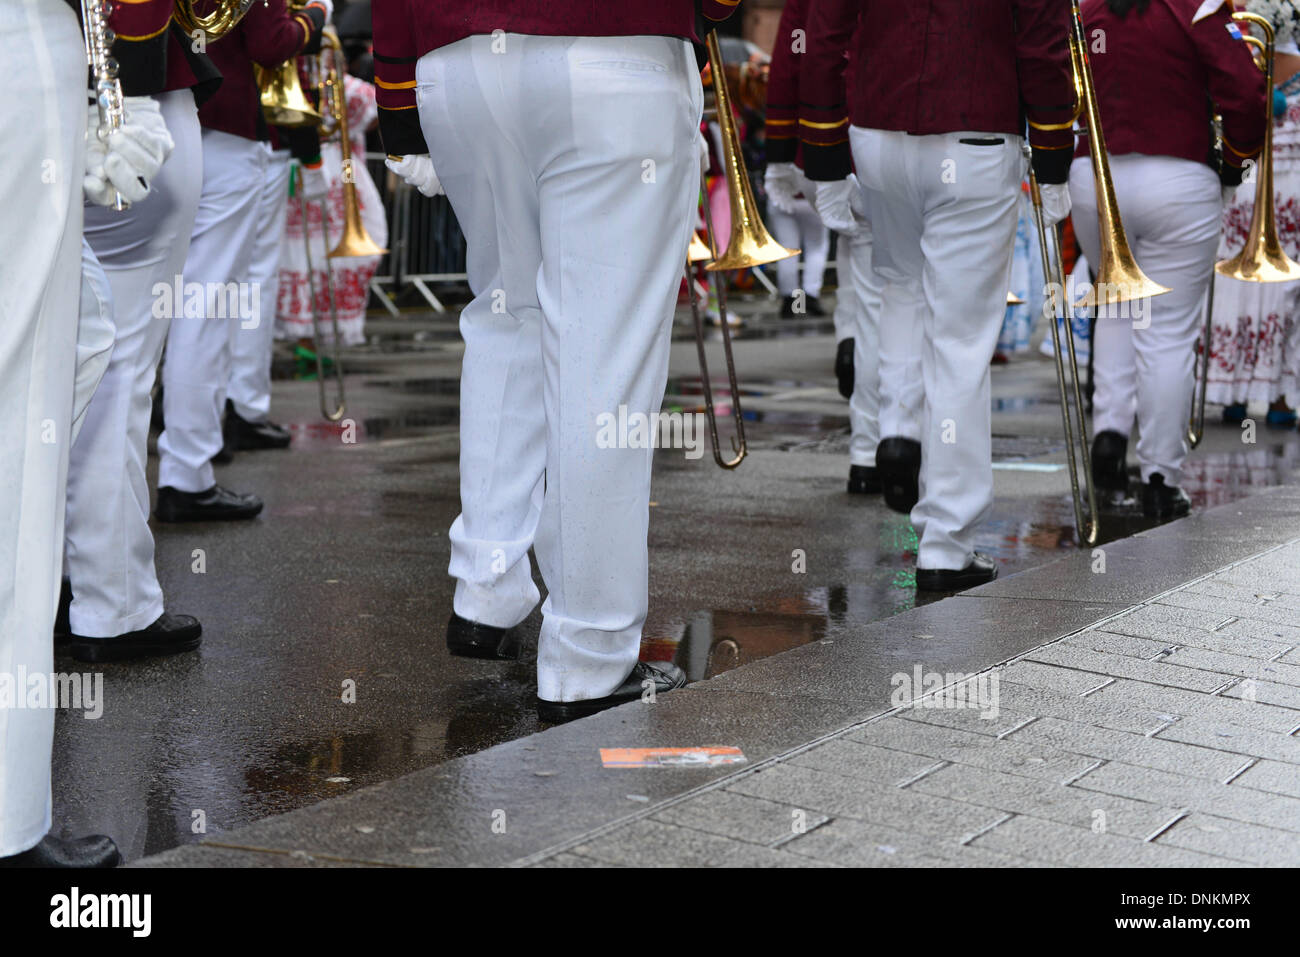 London, UK. 1st January 2014. Tens of thousands of people braved dreadful weather in central London this afternoon for the capital's annual New Year's Day parade, January 1st 2014, Photo by See li/Alamy Live News Stock Photo